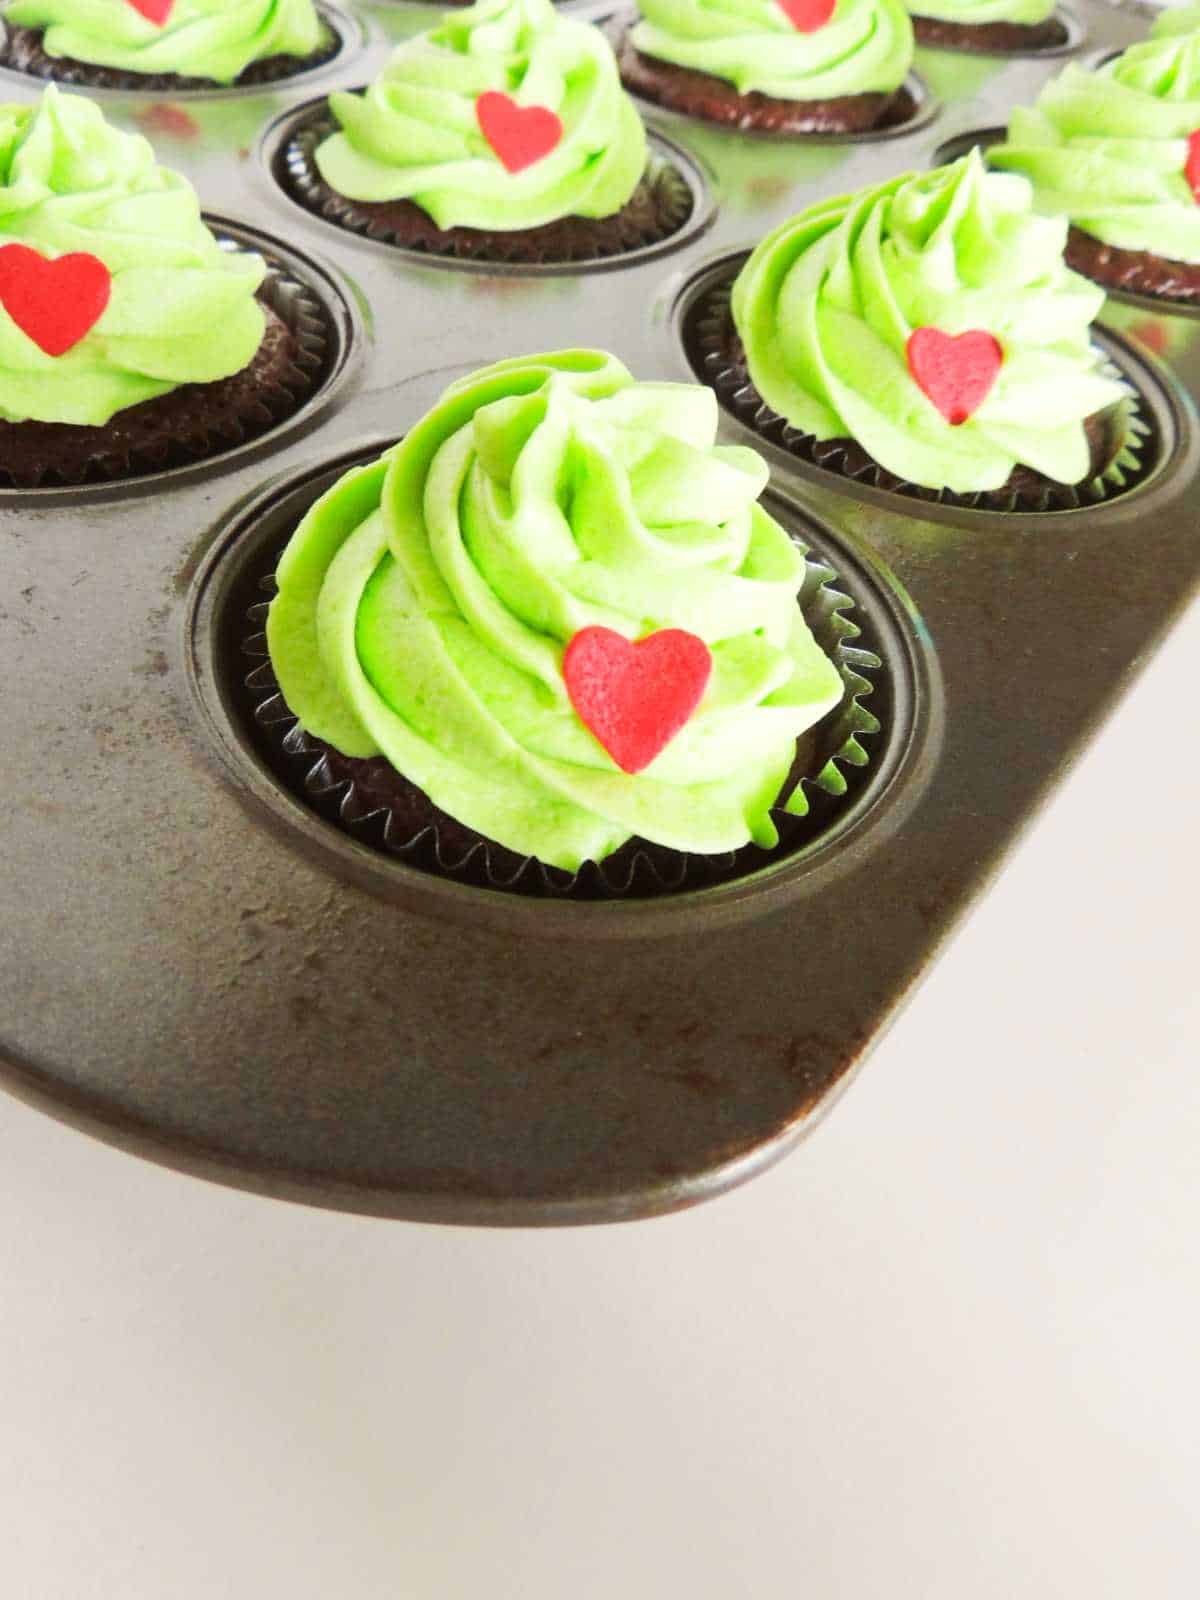 Red candy hearts and green frosting on  cupcakes.